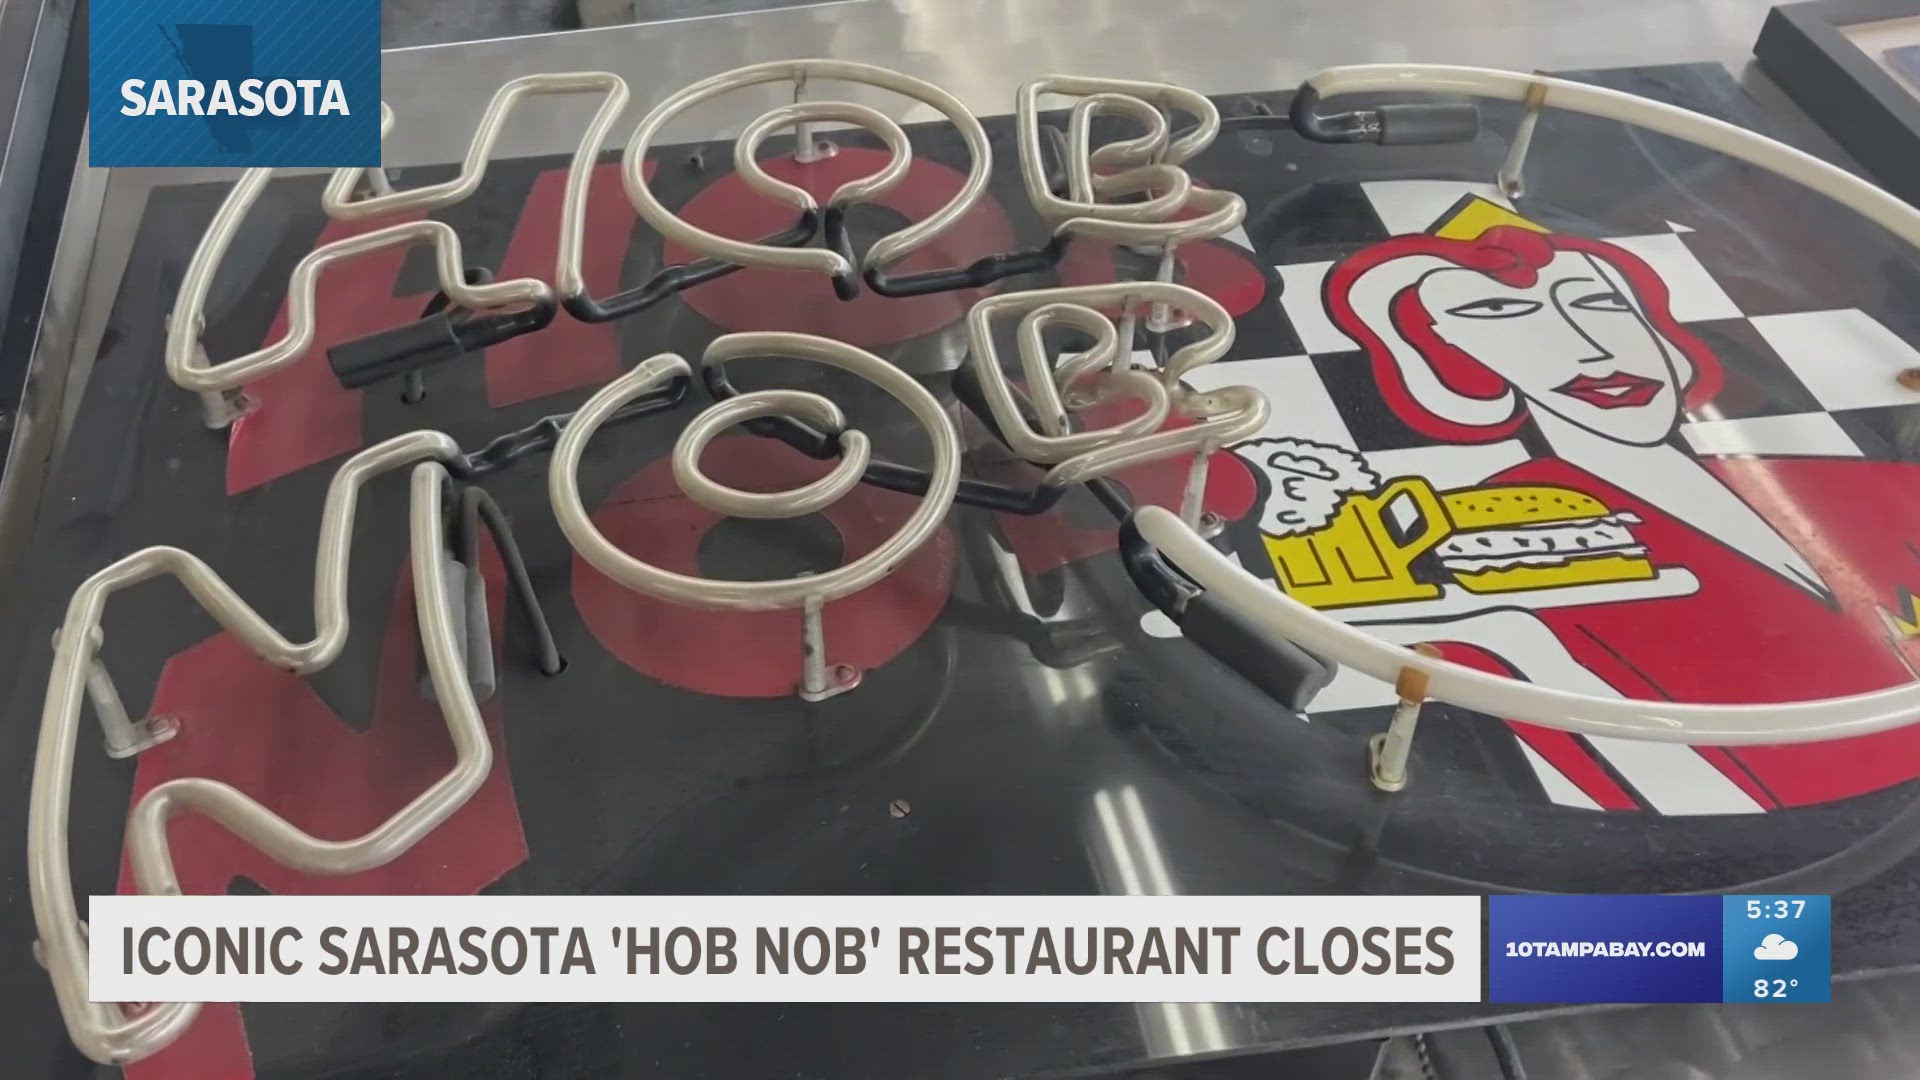 Opening first in 1957, Hob Nob's has been a popular spot for signature burgers in the Sarasota area.